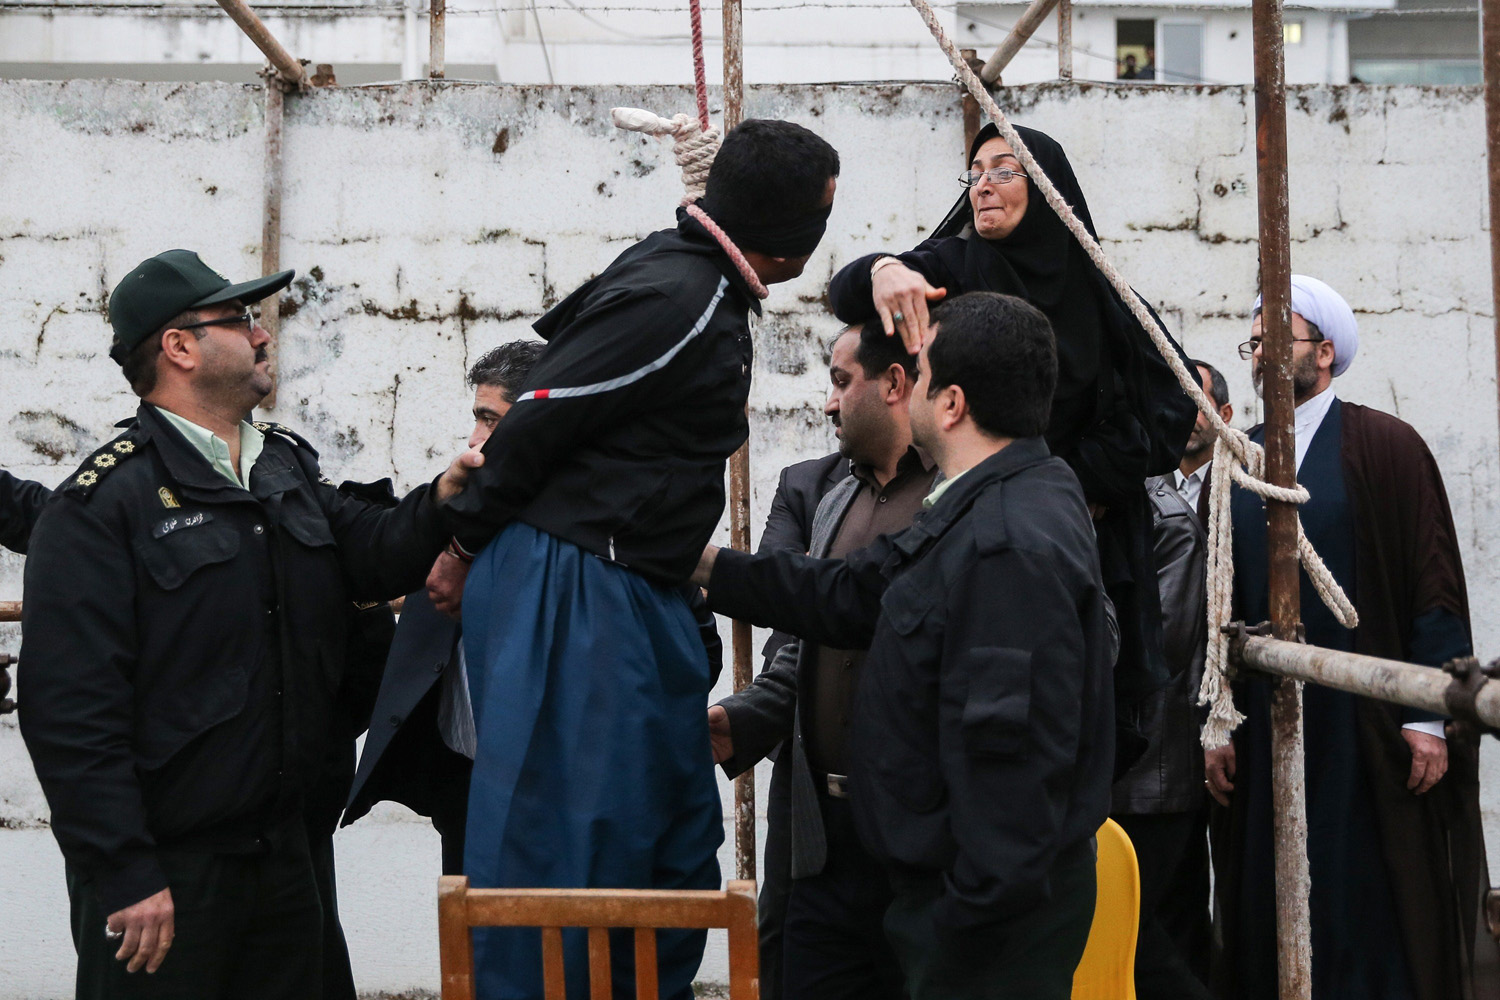 The mother (R) of Abdolah Hosseinzadeh, who was murdered in 2007, slaps Balal who killed her son during the execution ceremony in the northern city of Nowshahr on April 15, 2014 just before she removed the noose around his neck with the help of her husband, sparing the life of her son's convicted murderer.